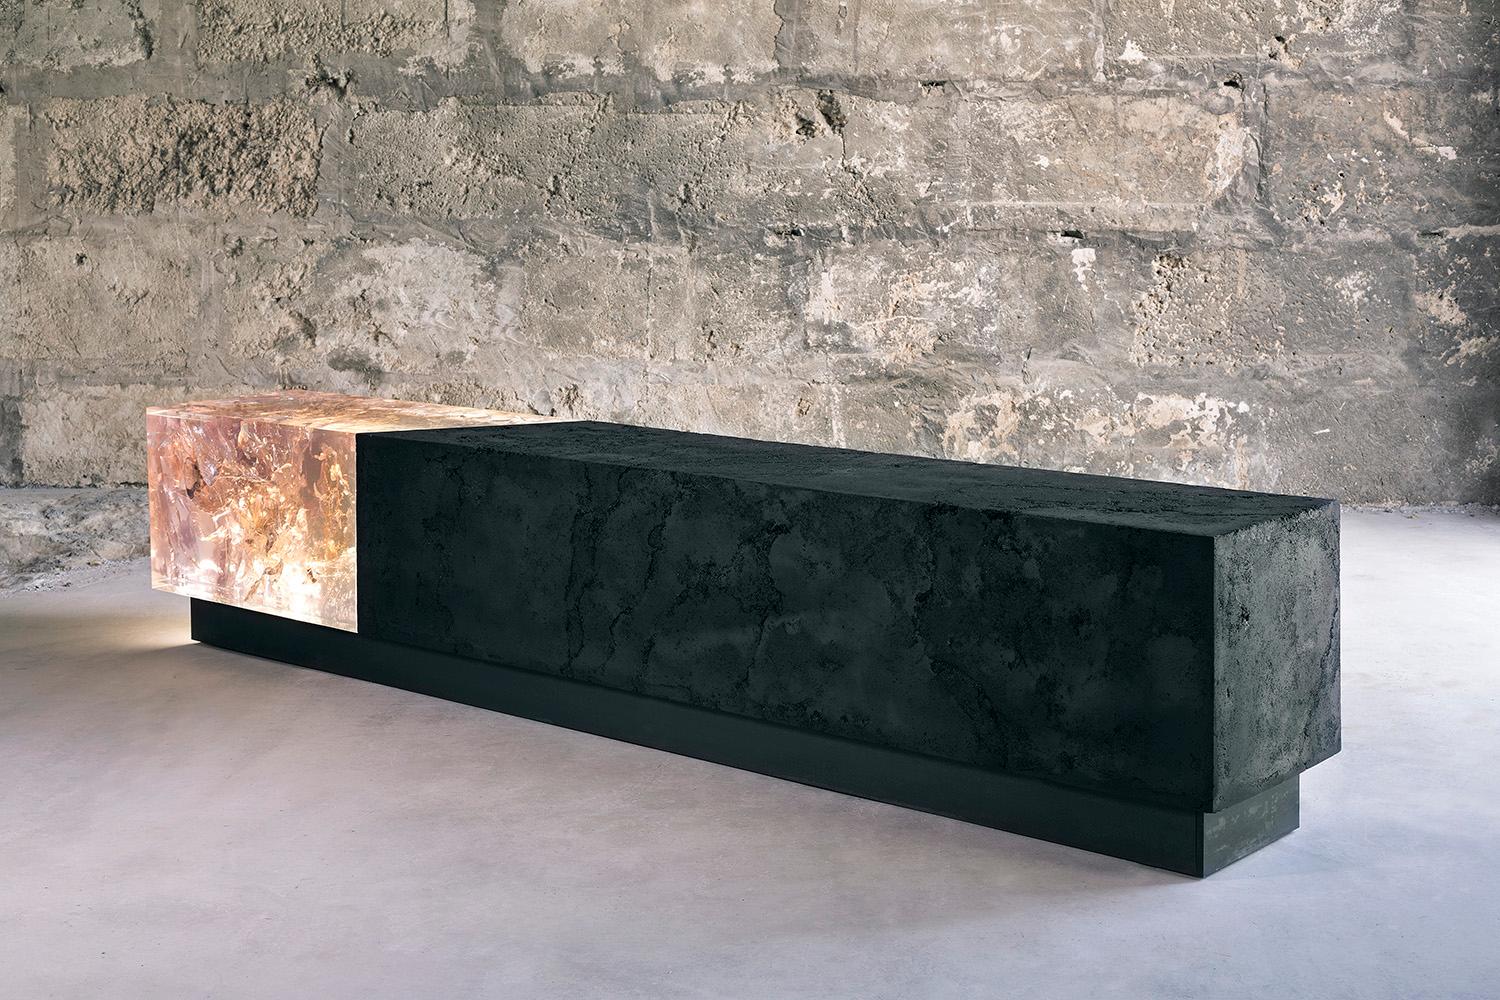 Counterpart II by Tom Price - large sculpture and bench, 7.2ft wide For Sale 4